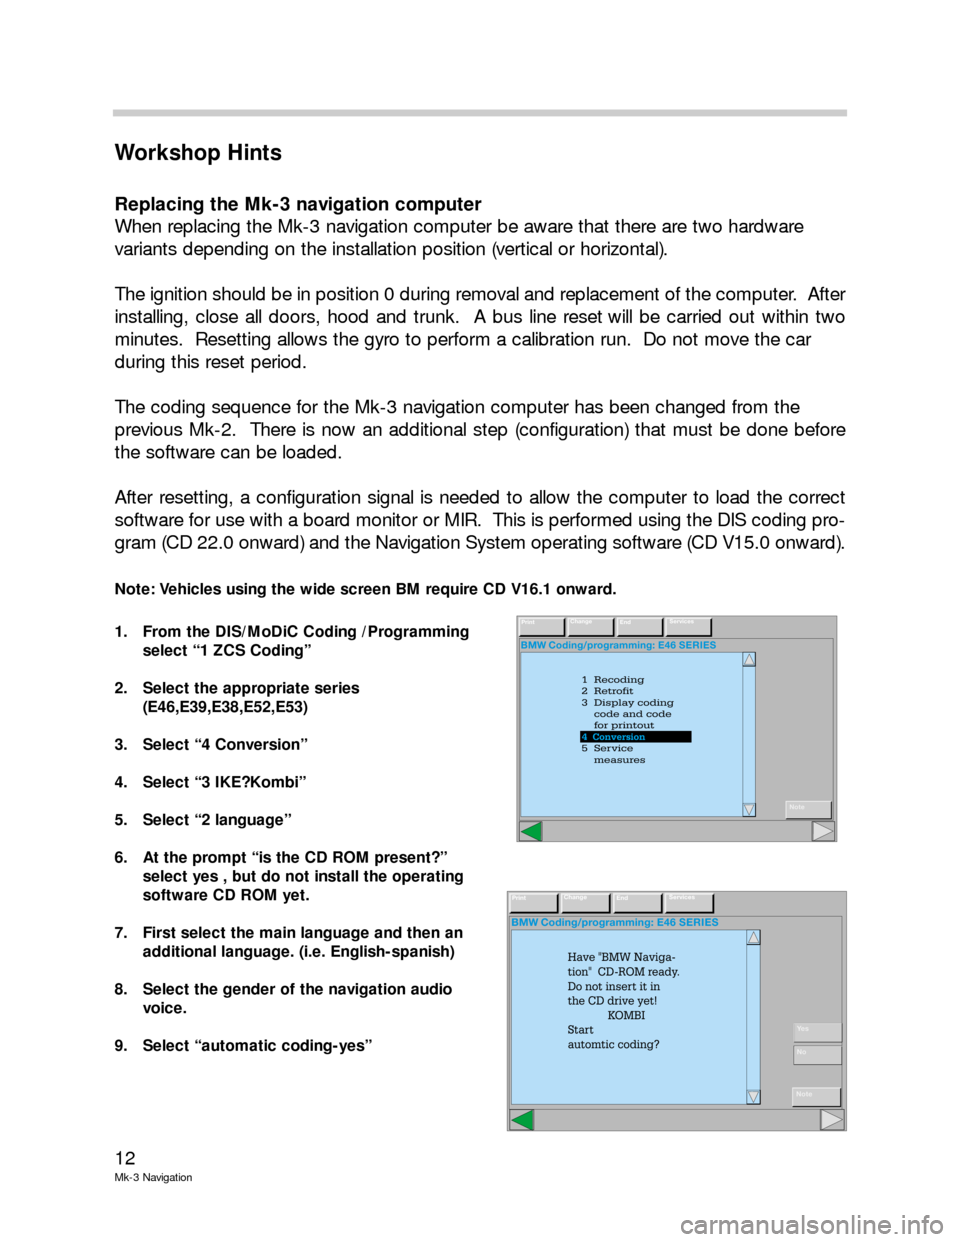 BMW 3 SERIES 2000 E46 Mk3 Navigation System Manual 12
Mk-3 Navigation
Workshop Hints
Replacing the Mk-3 navigation computer
When replacing the Mk-3 navigation computer be aware that there are two hardware 
variants depending on the installation positi